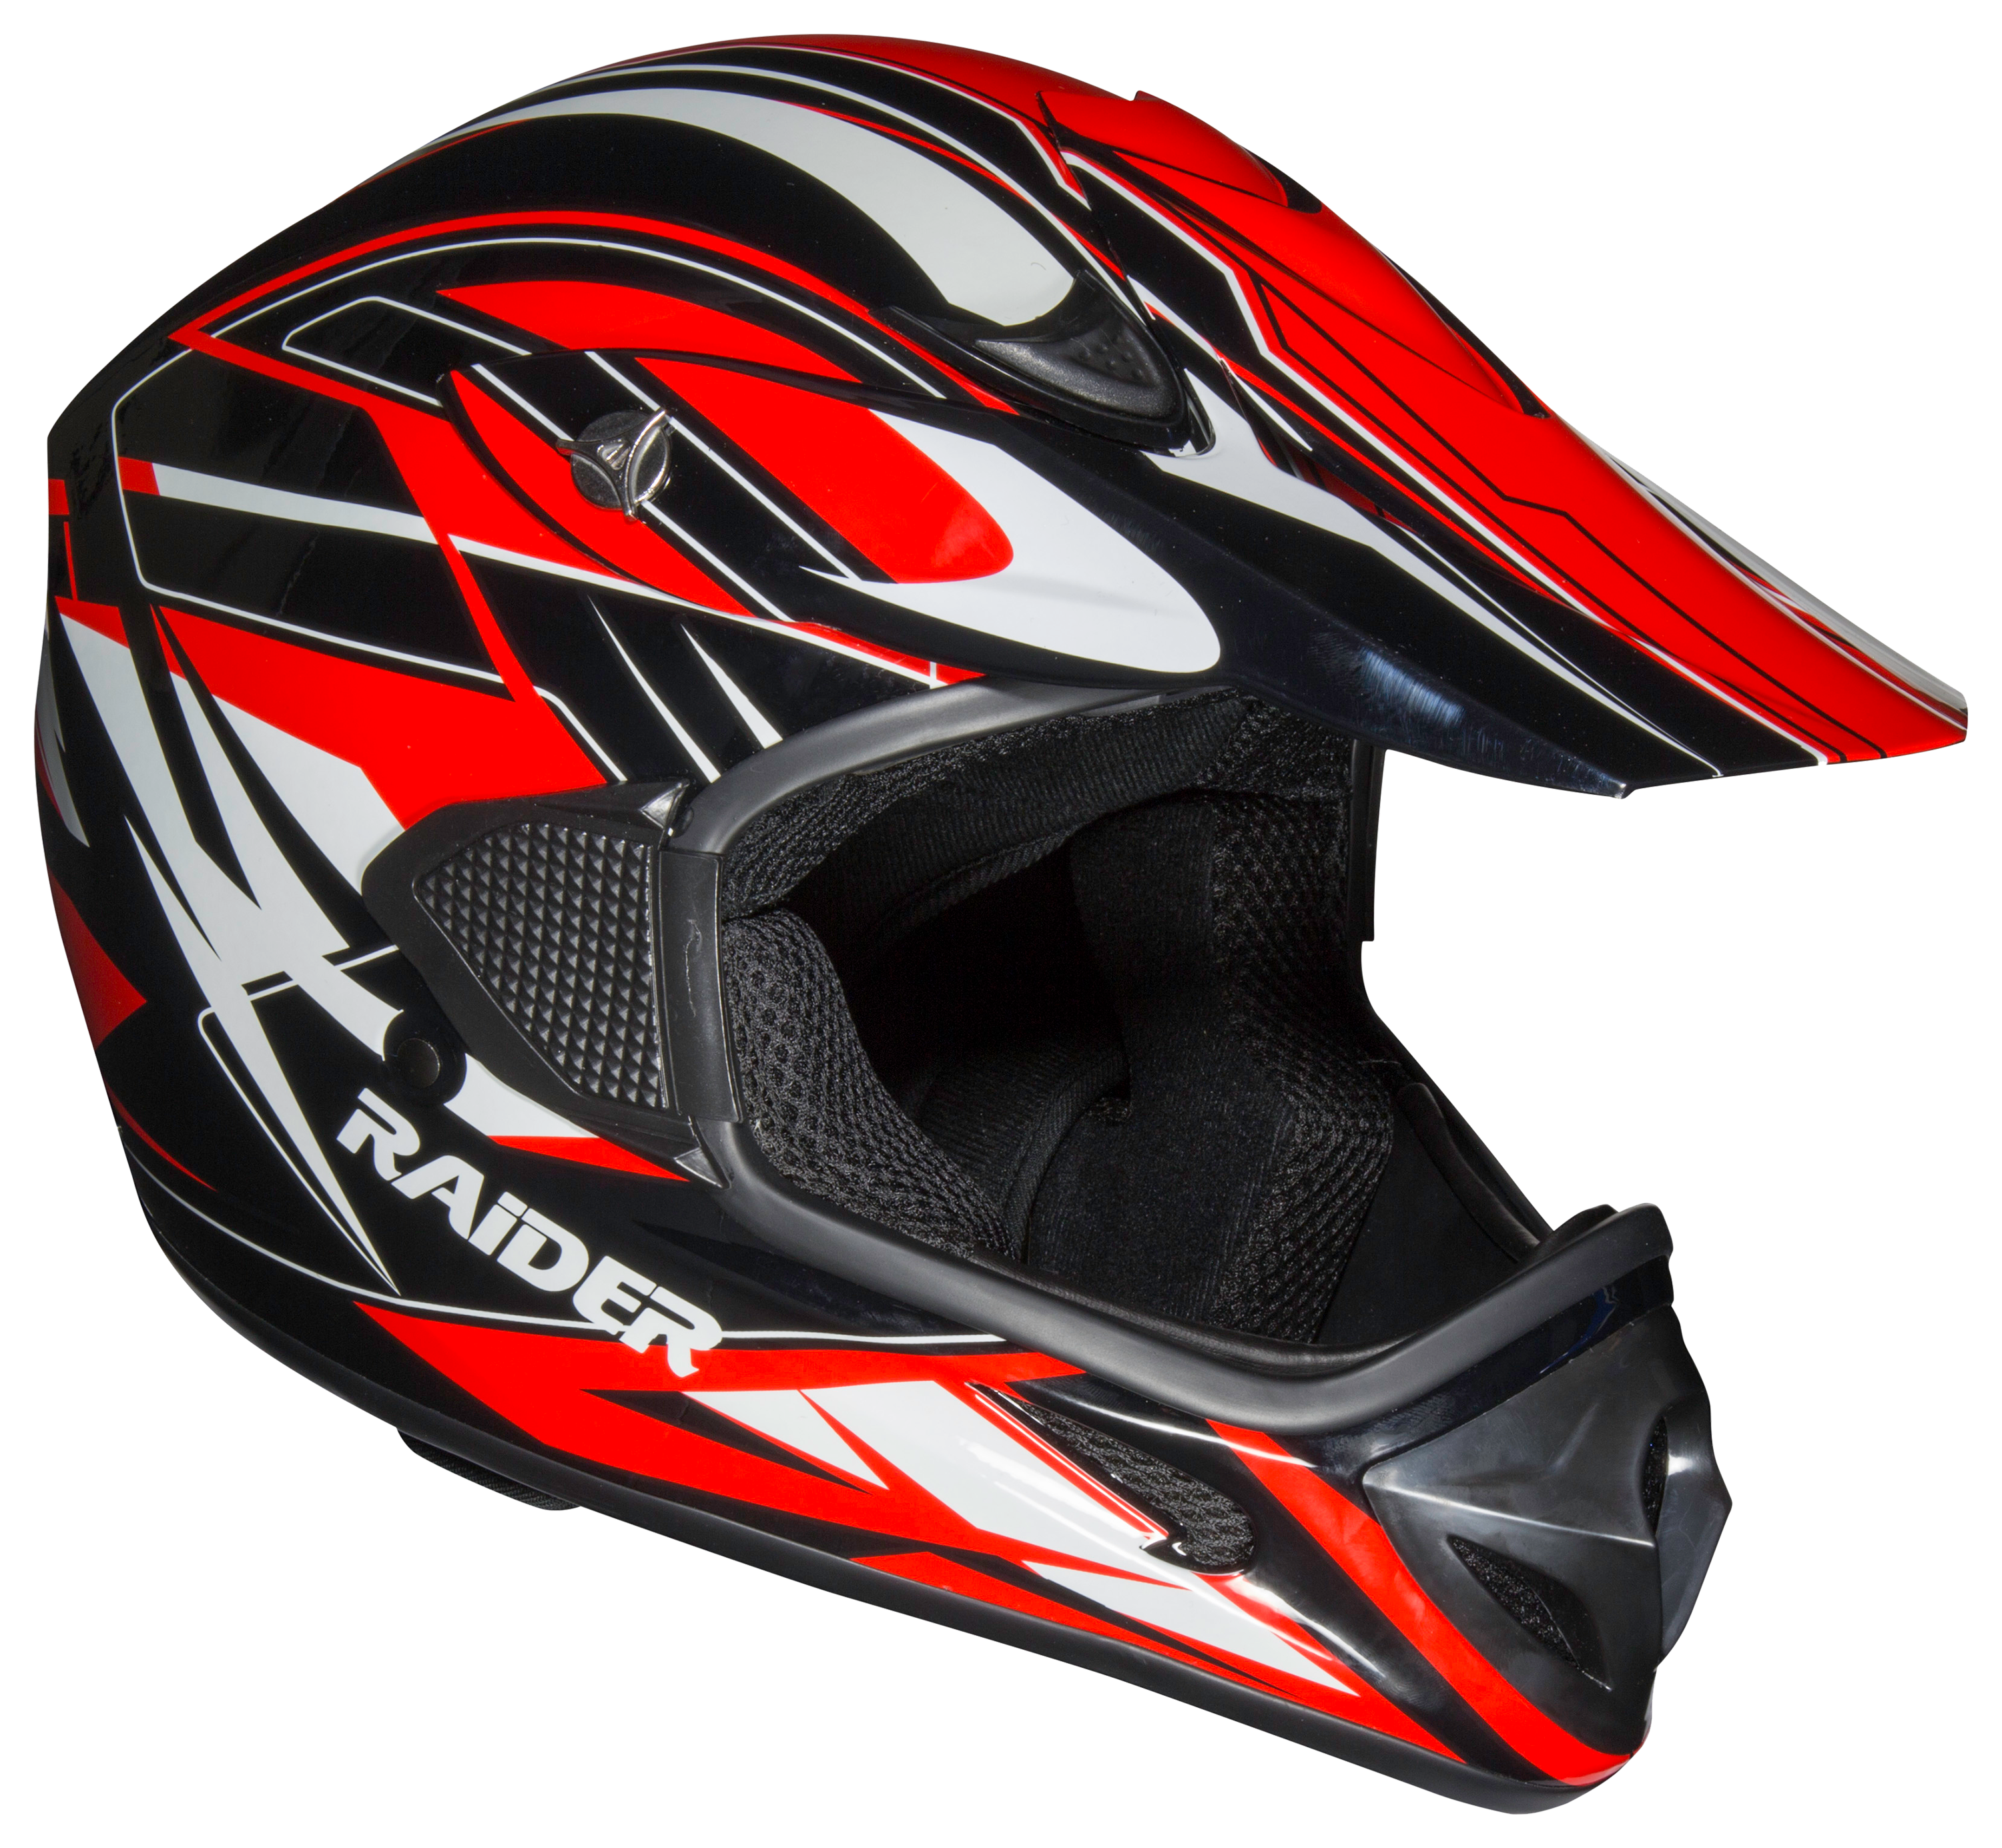 Raider RX1 MX Off-Road Helmets for Adults